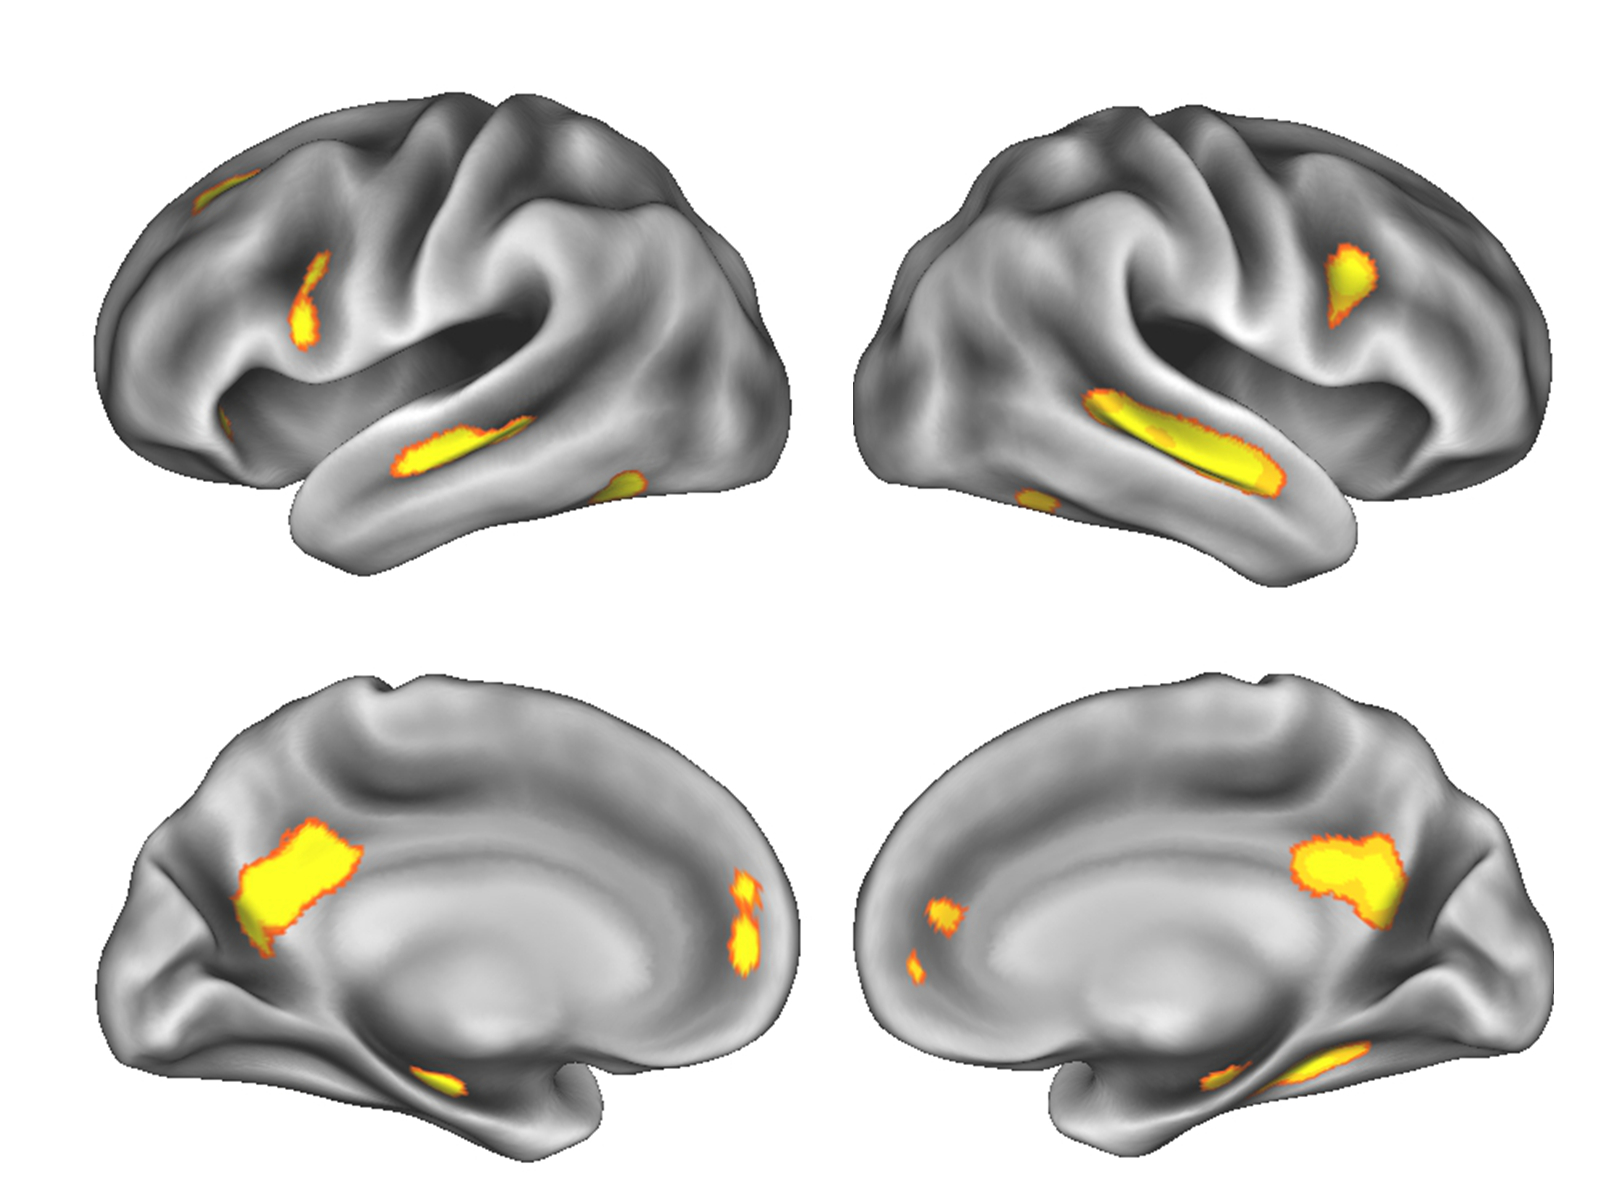 Image of gray matter changes in the brain during pregnancy